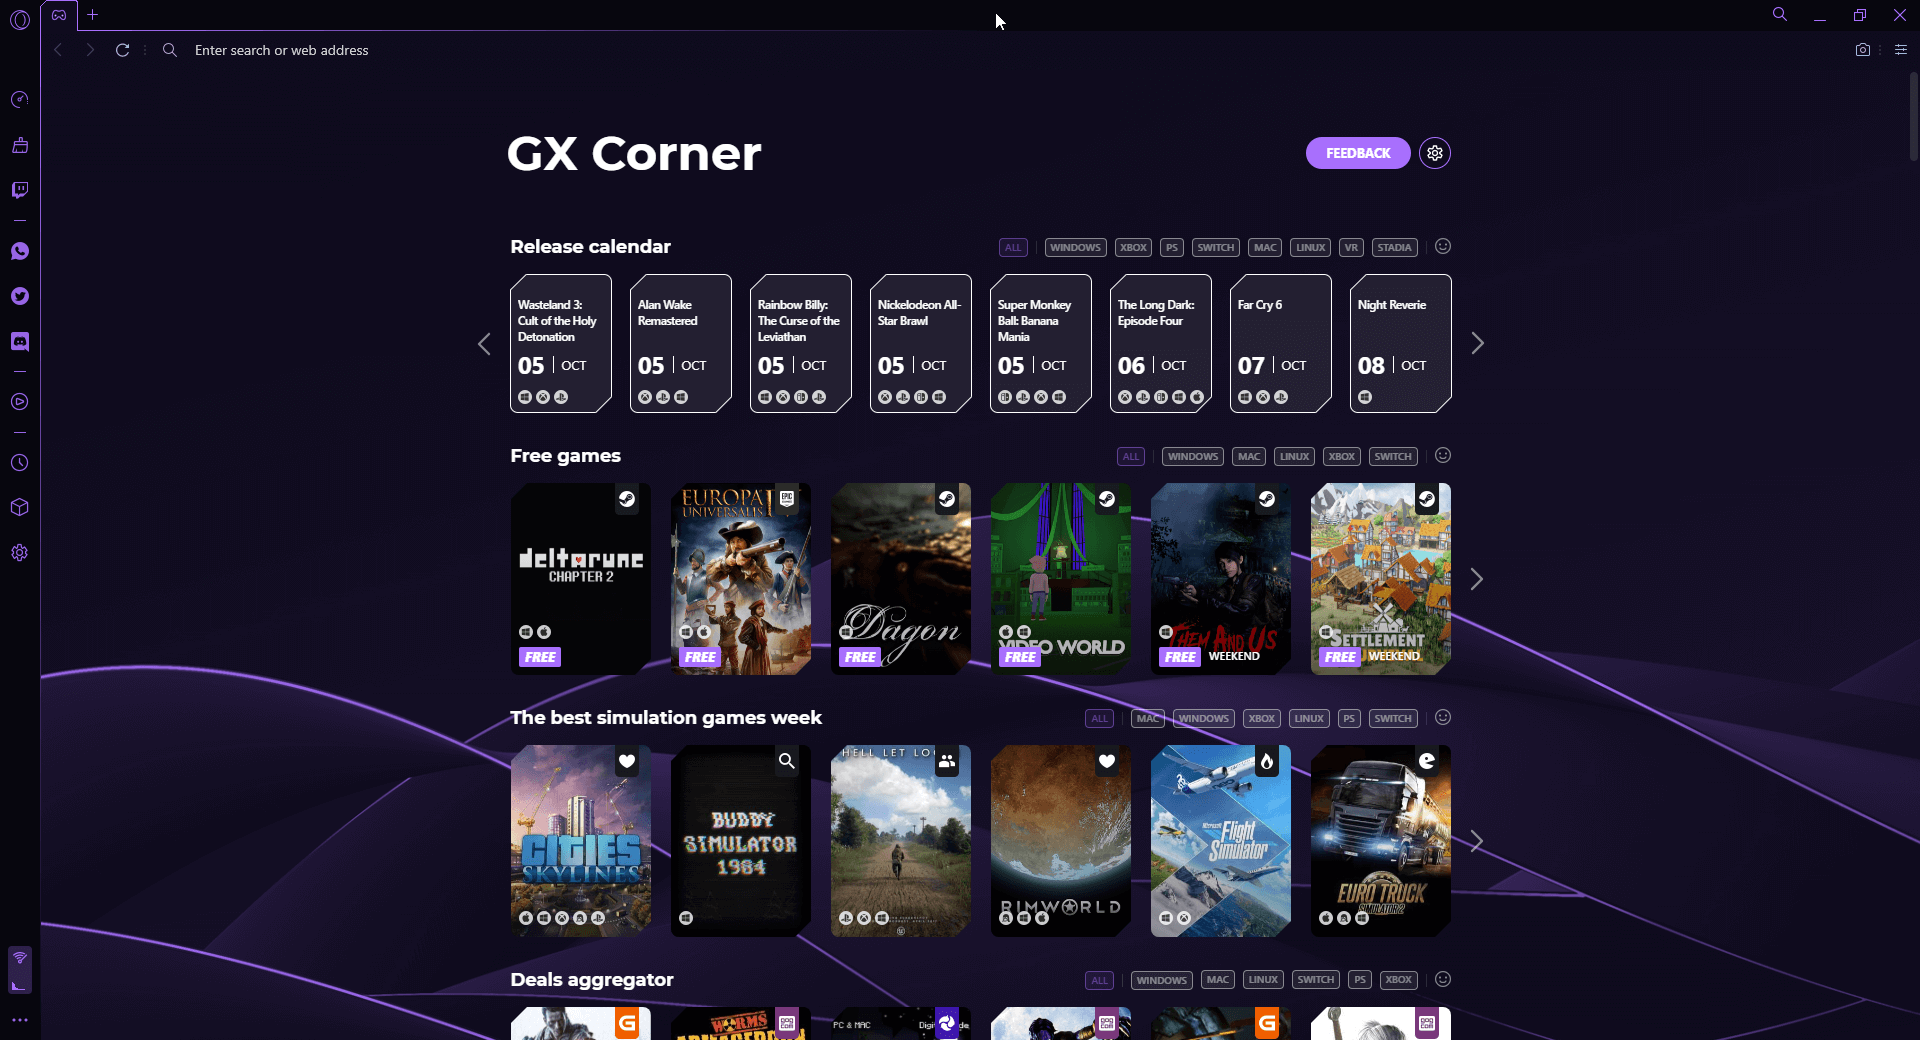 Opera on X: With all the best gaming deals aggregated in the GX